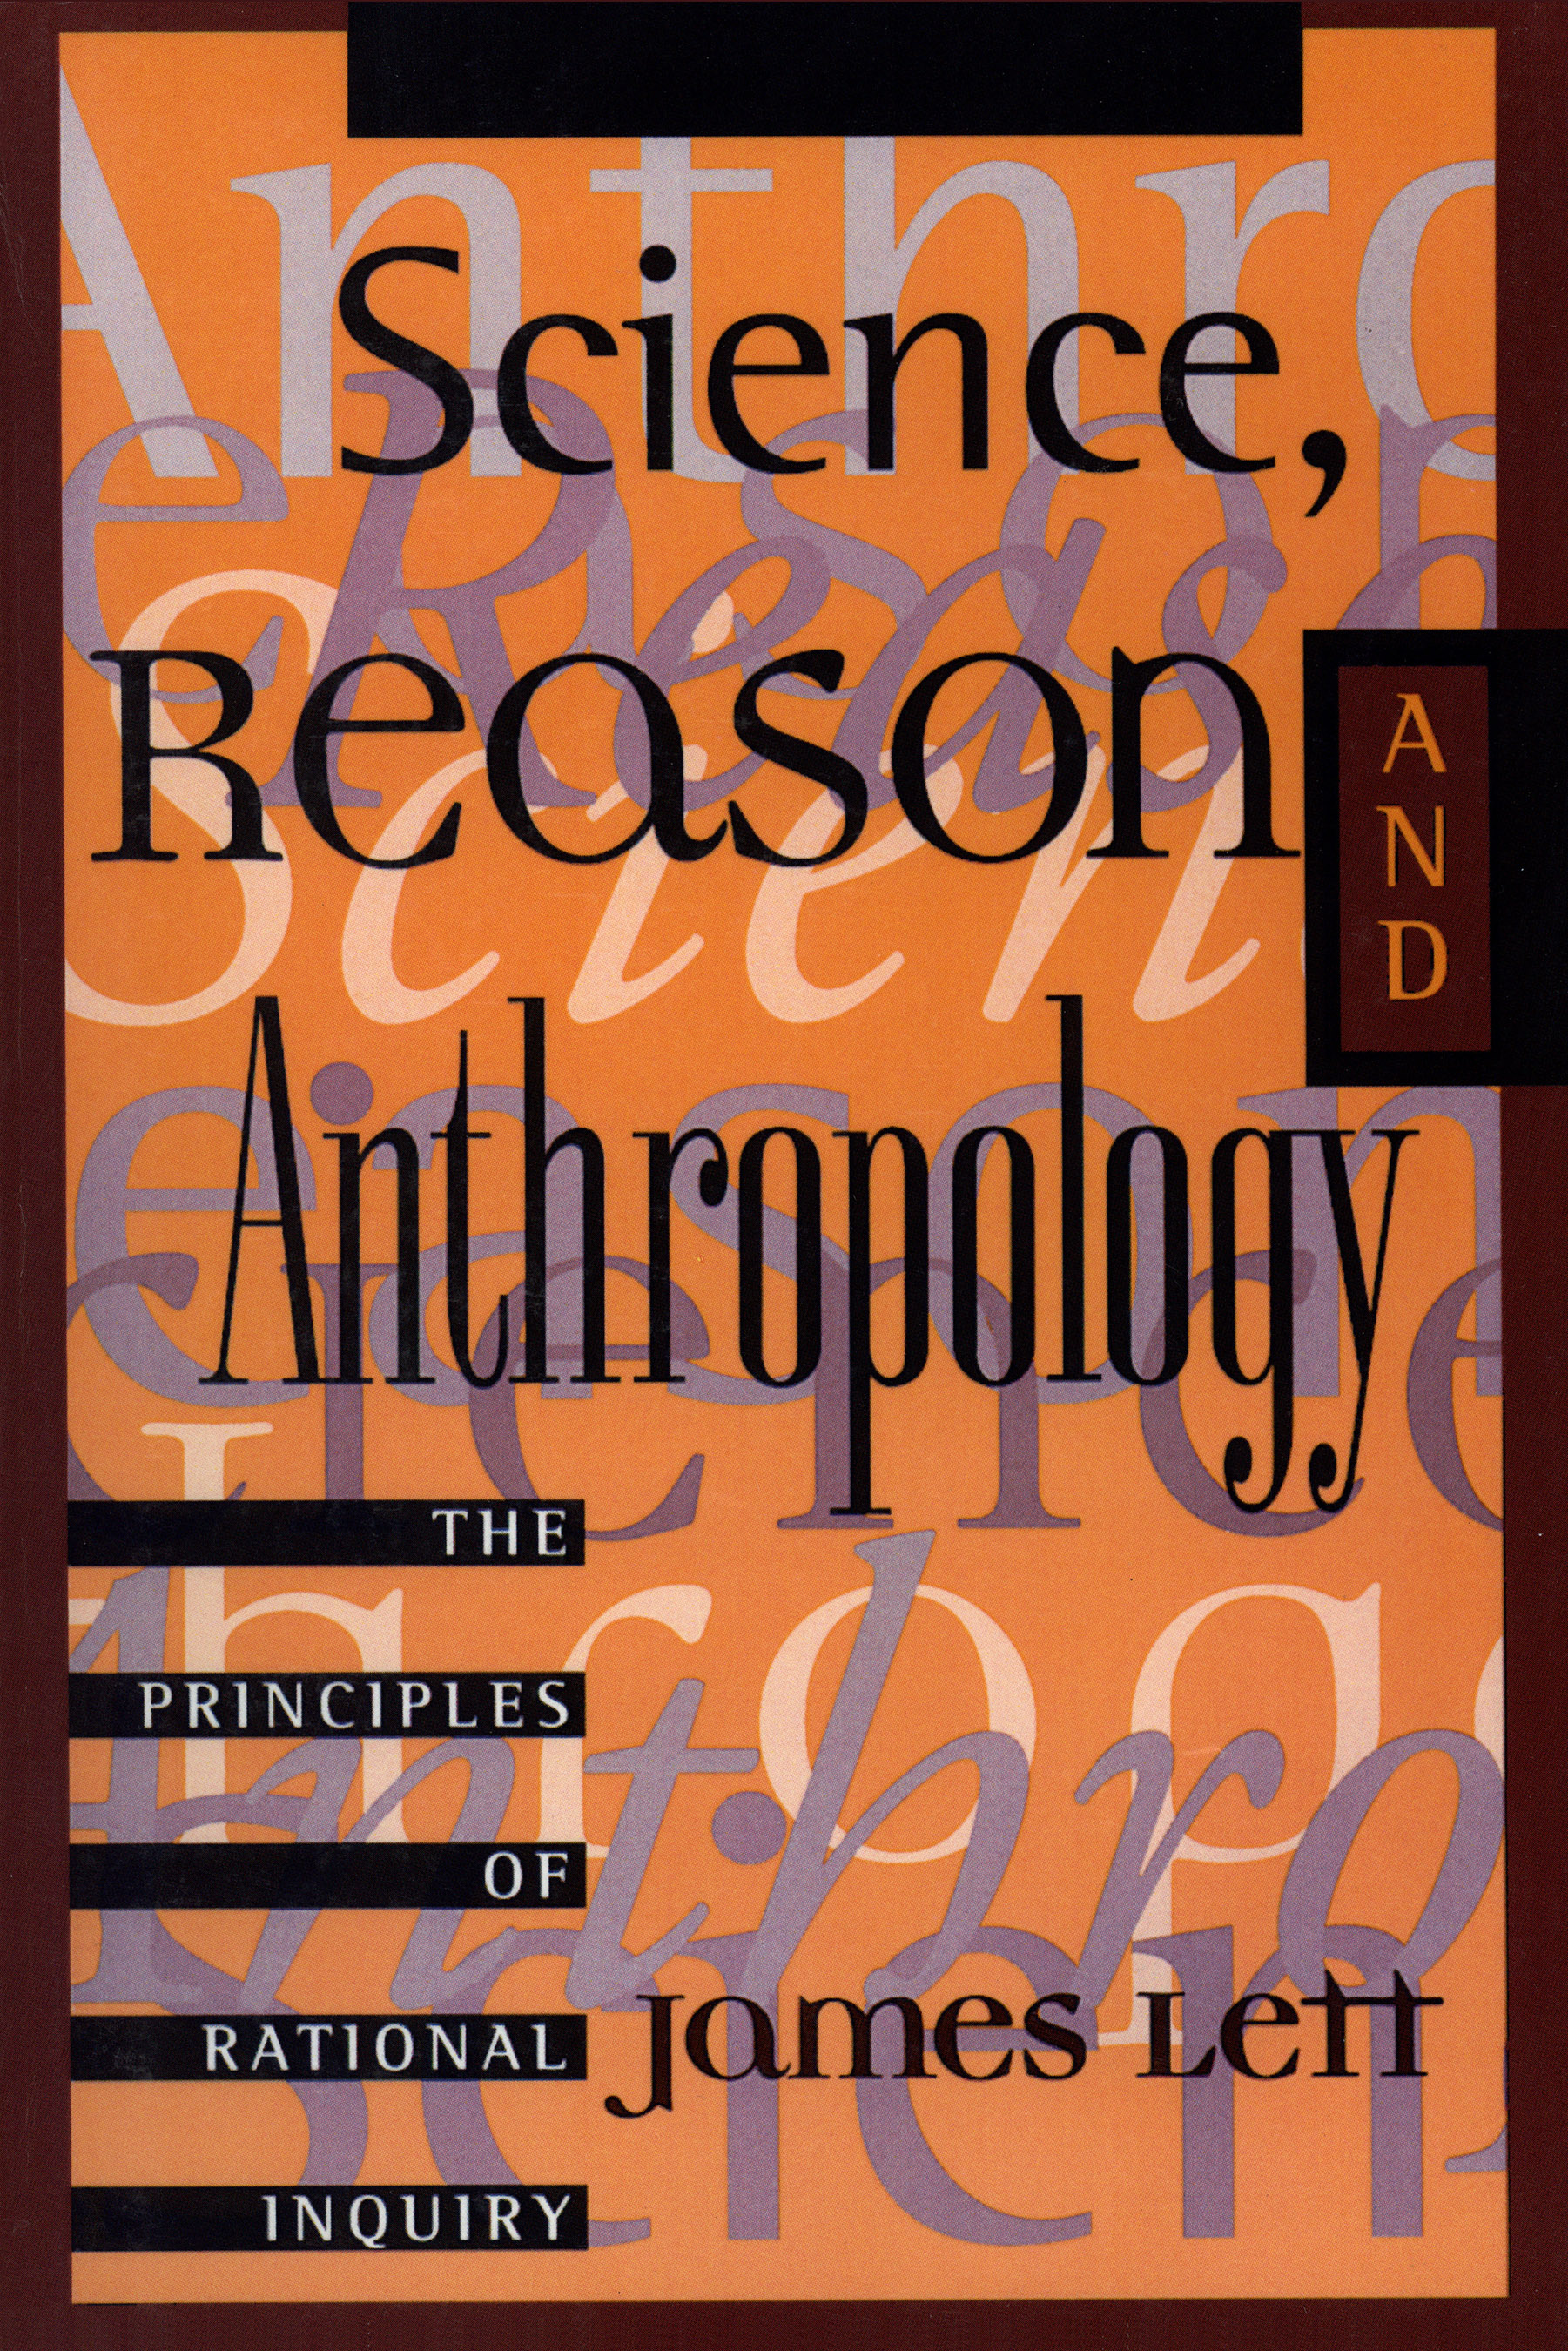 Science, Reason, and Anthropology: A Guide to Critical Thinking